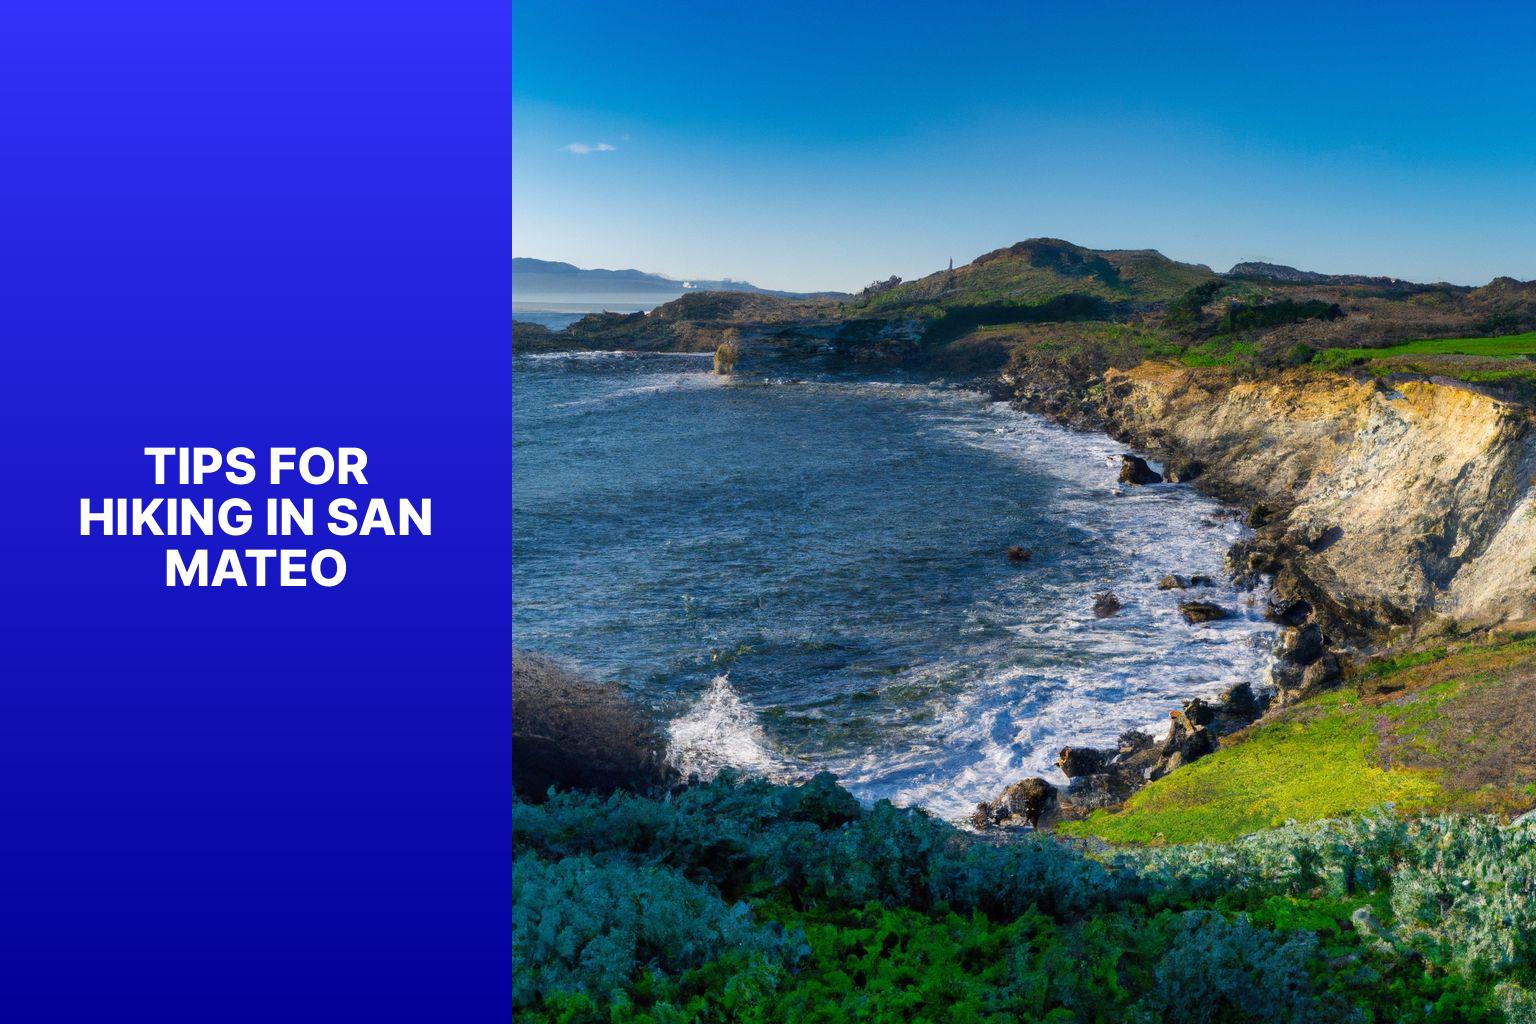 Tips for Hiking in San Mateo - Hikes in San Mateo 